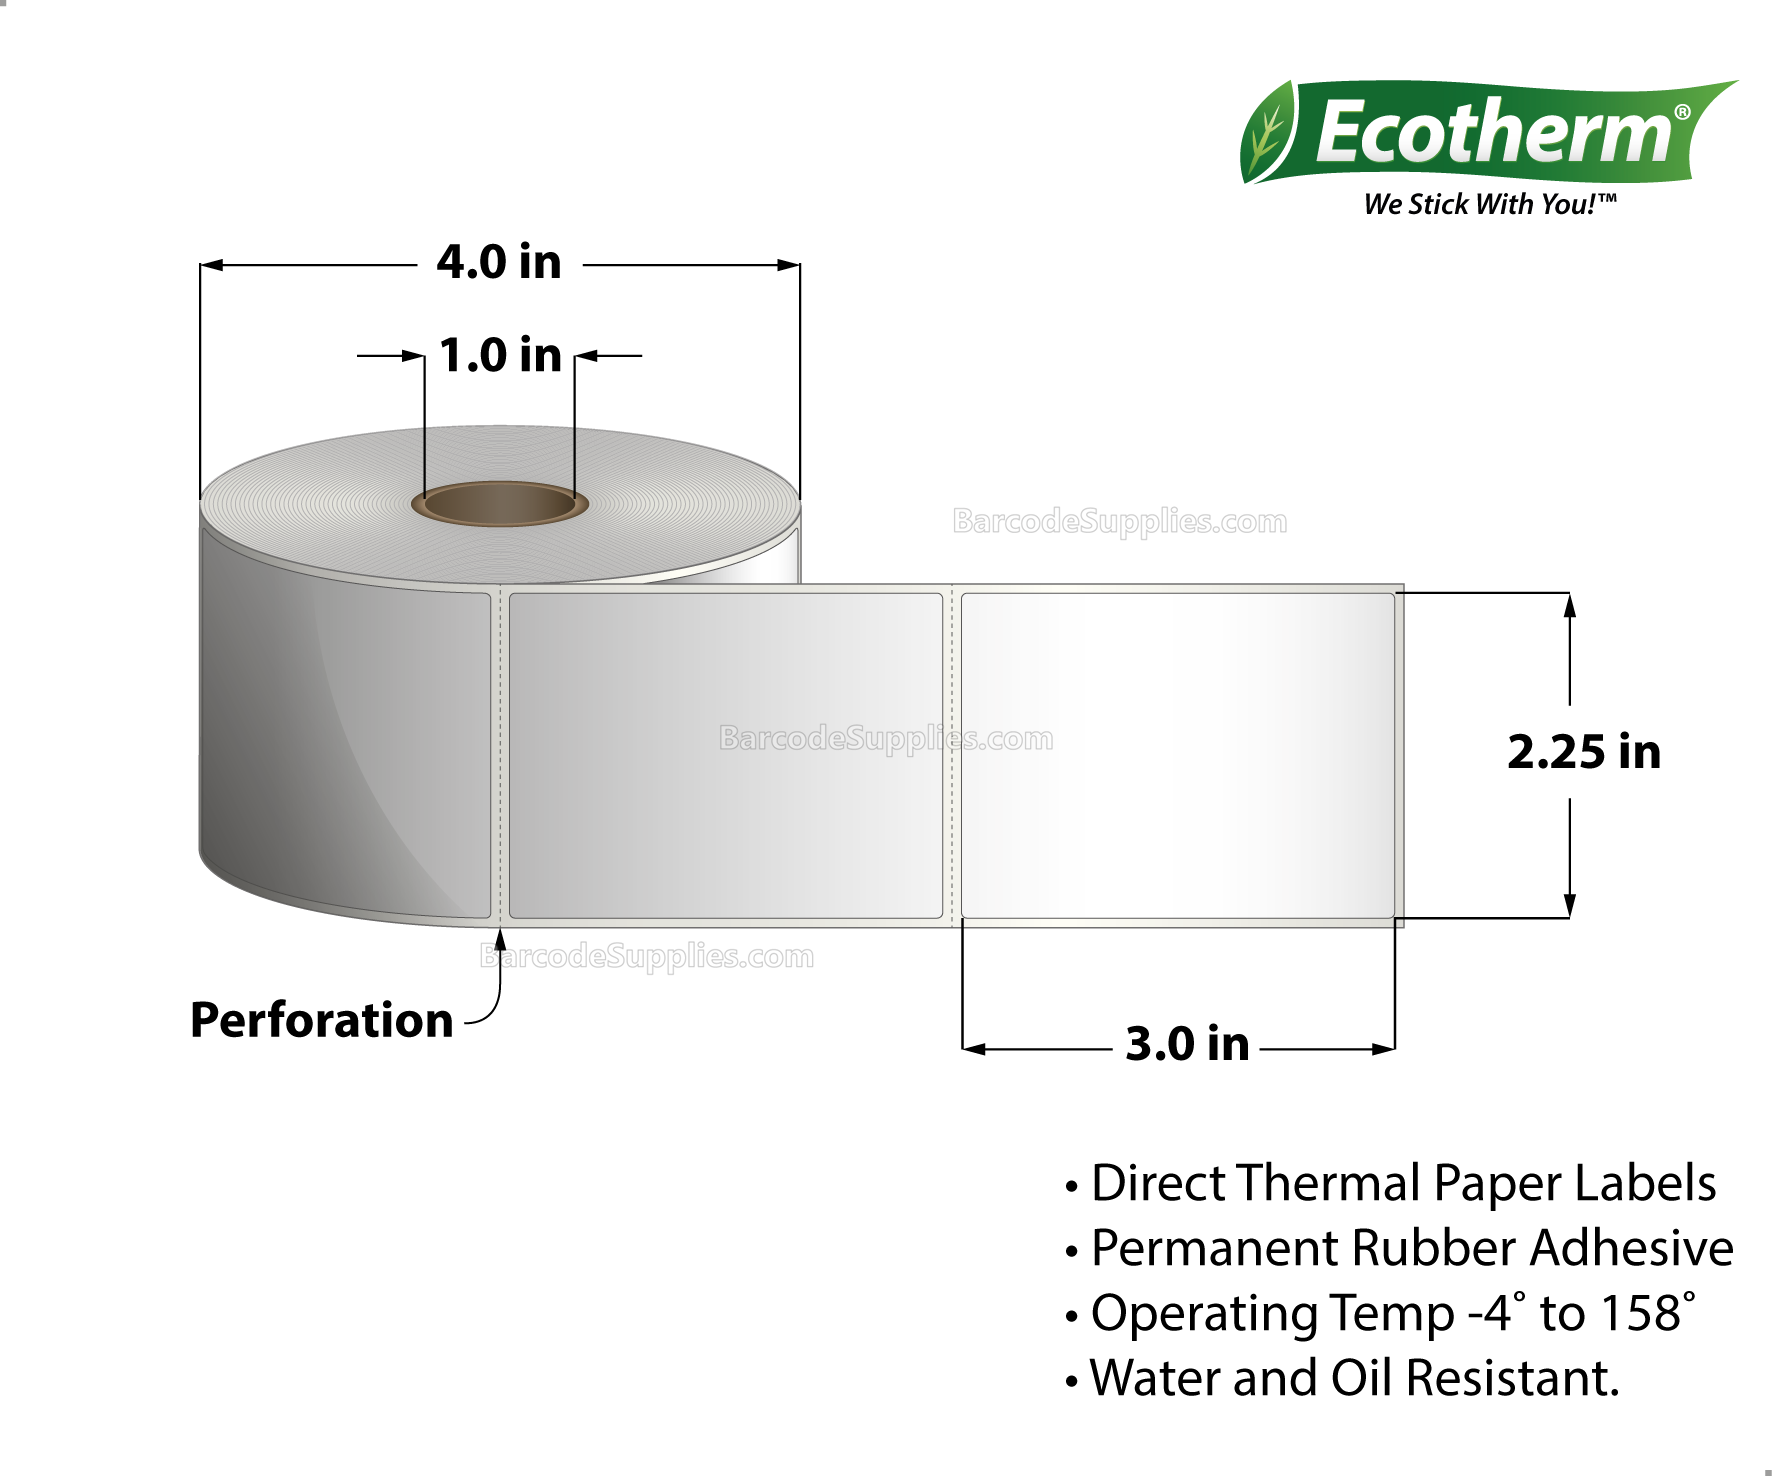 2.25 x 3 Direct Thermal White Labels With Rubber Adhesive - Perforated - 525 Labels Per Roll - Carton Of 4 Rolls - 2100 Labels Total - MPN: ECOTHERM14121-4